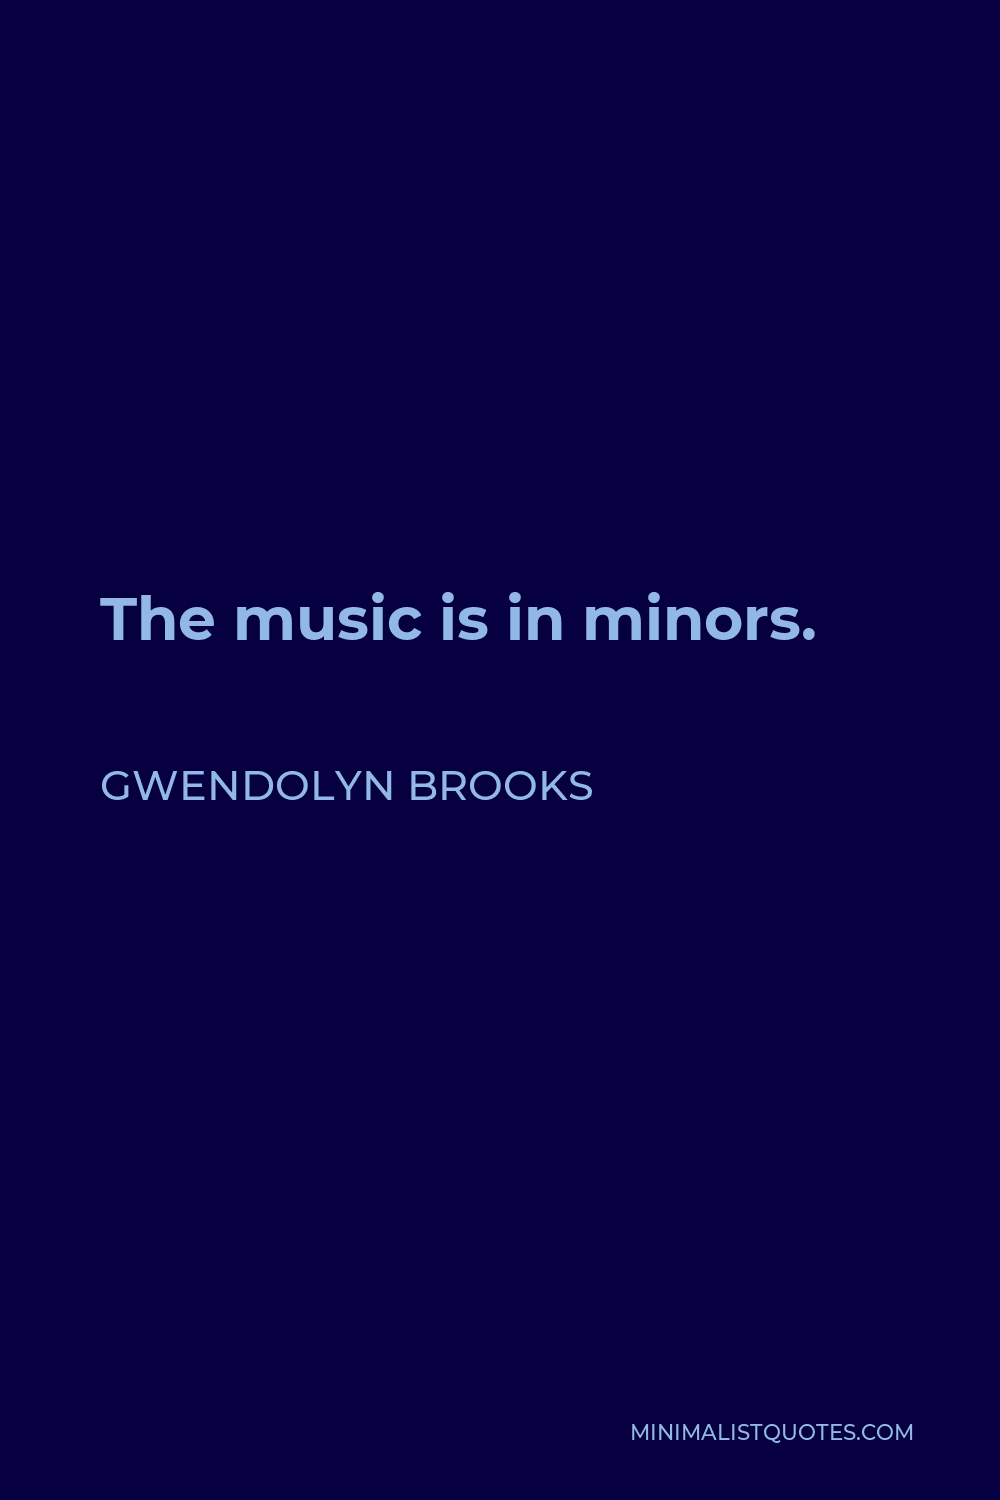 Gwendolyn Brooks Quote - The music is in minors.